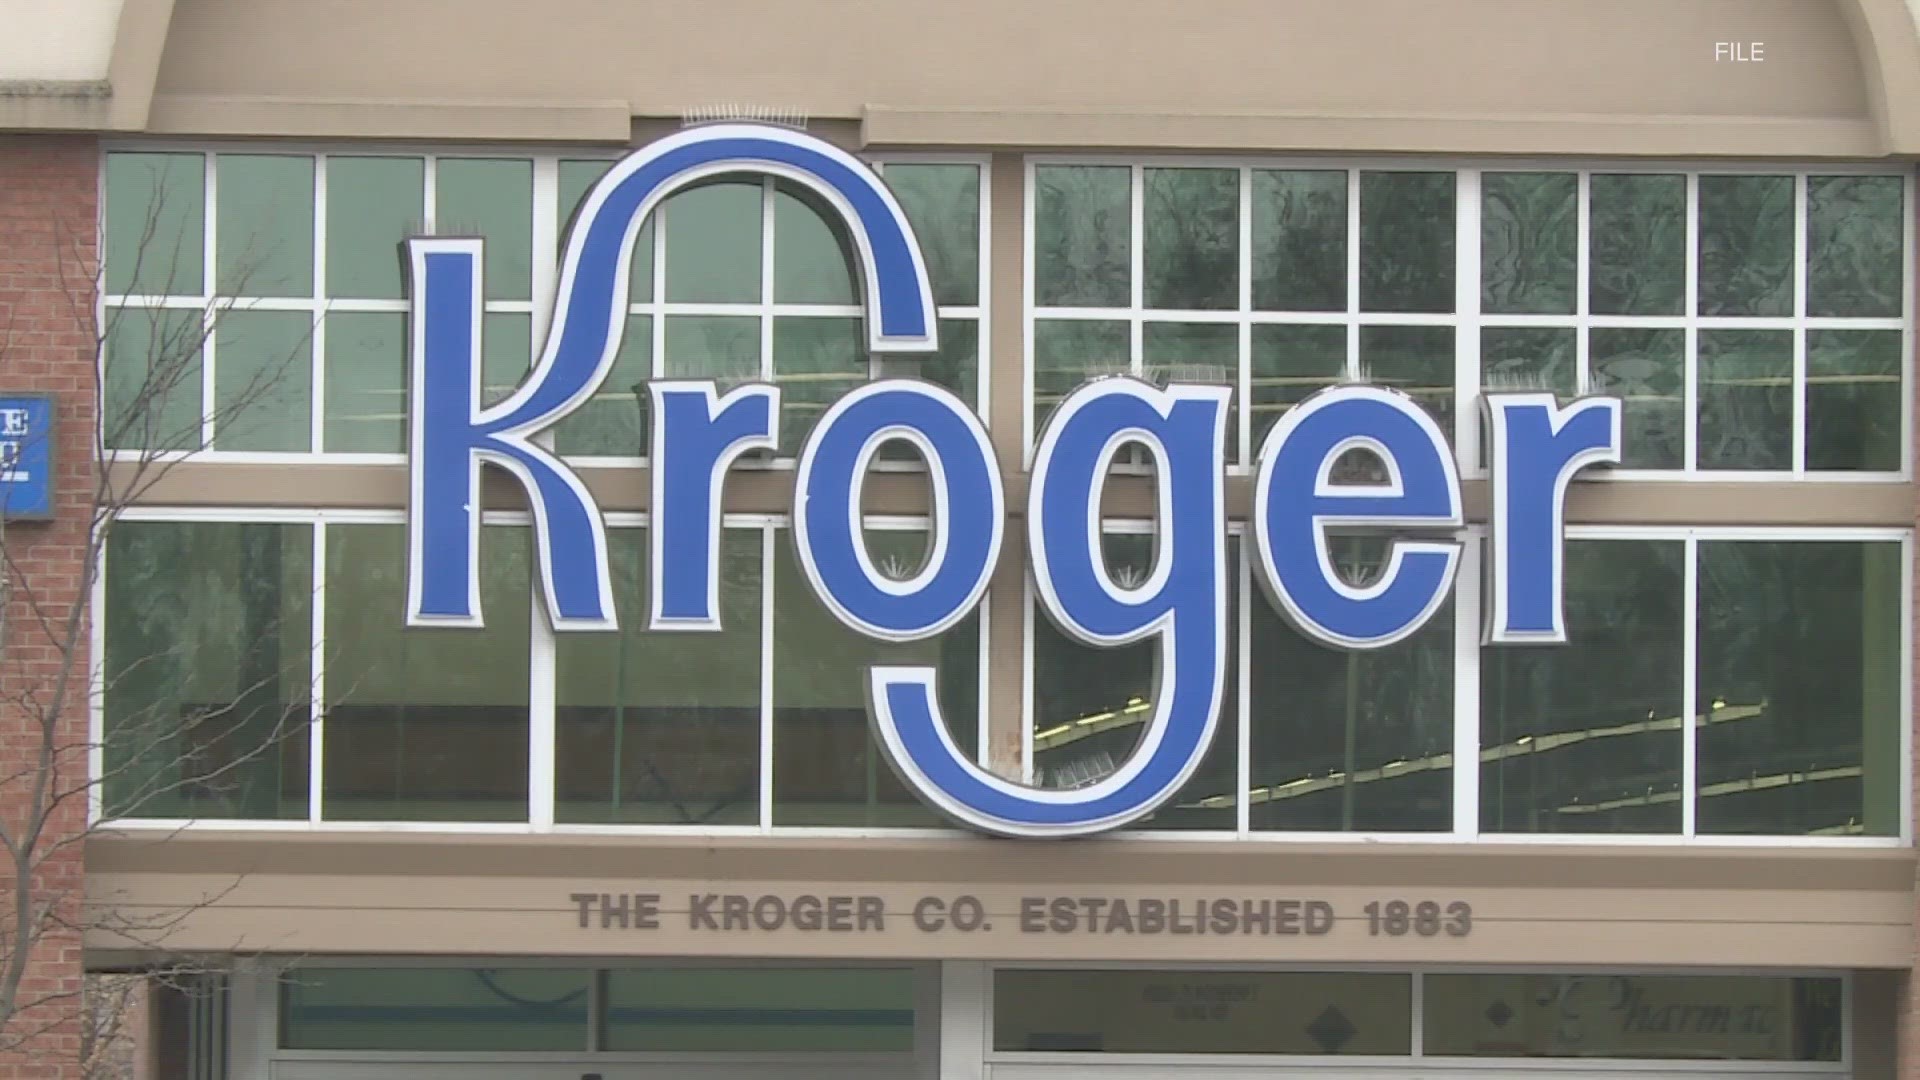 Coleman claims between 2006 and 2019 Kroger was responsible for over 11% of all opioid pills dispensed in Kentucky.